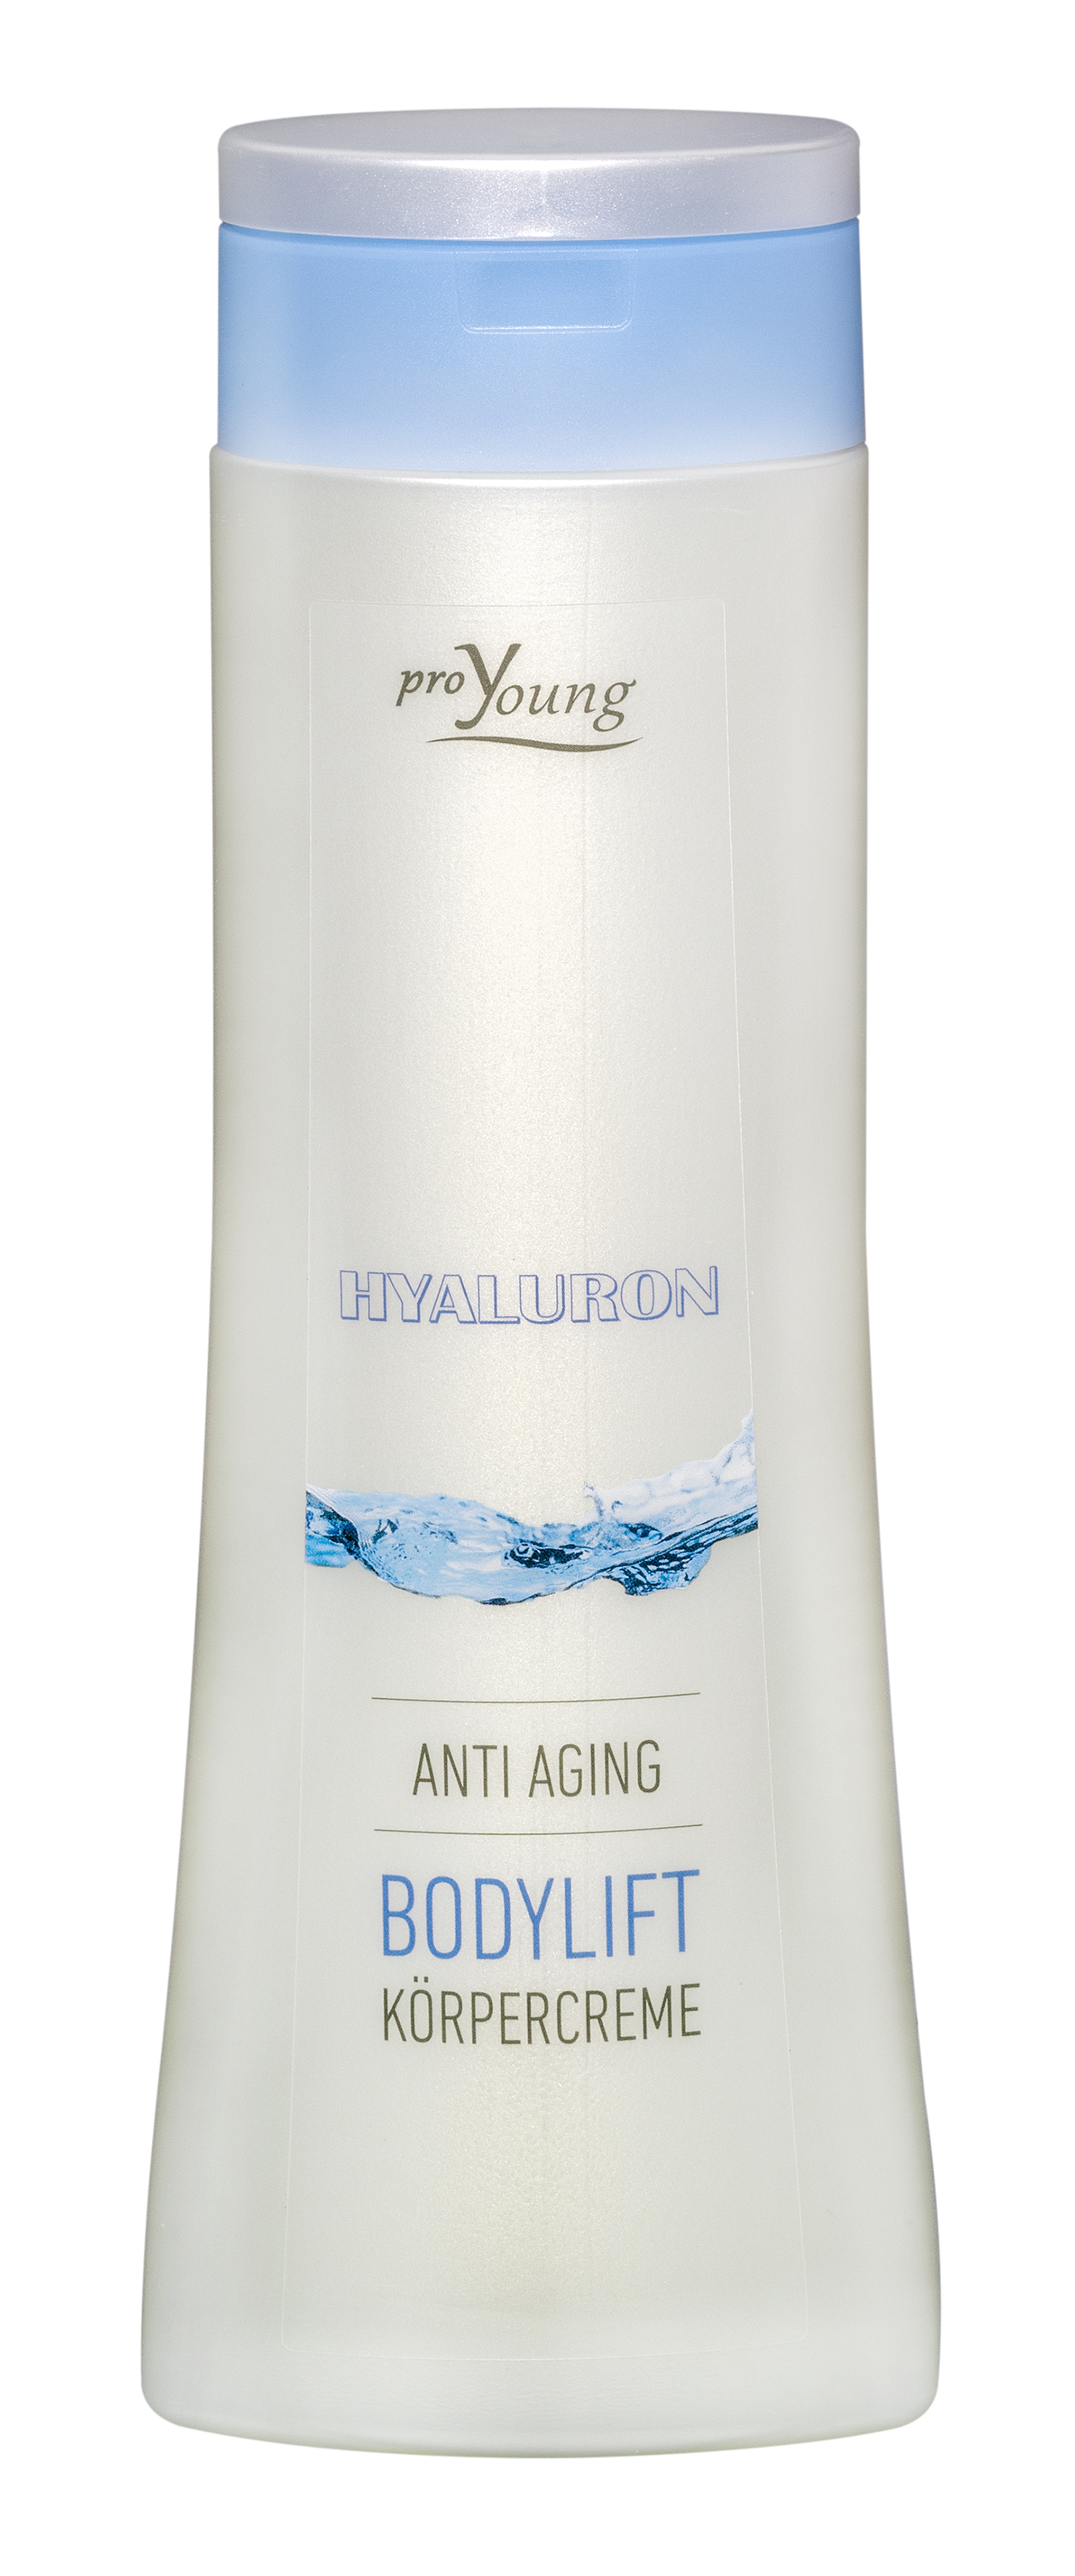 Hyaluron proYoung AntiAging Bodylift